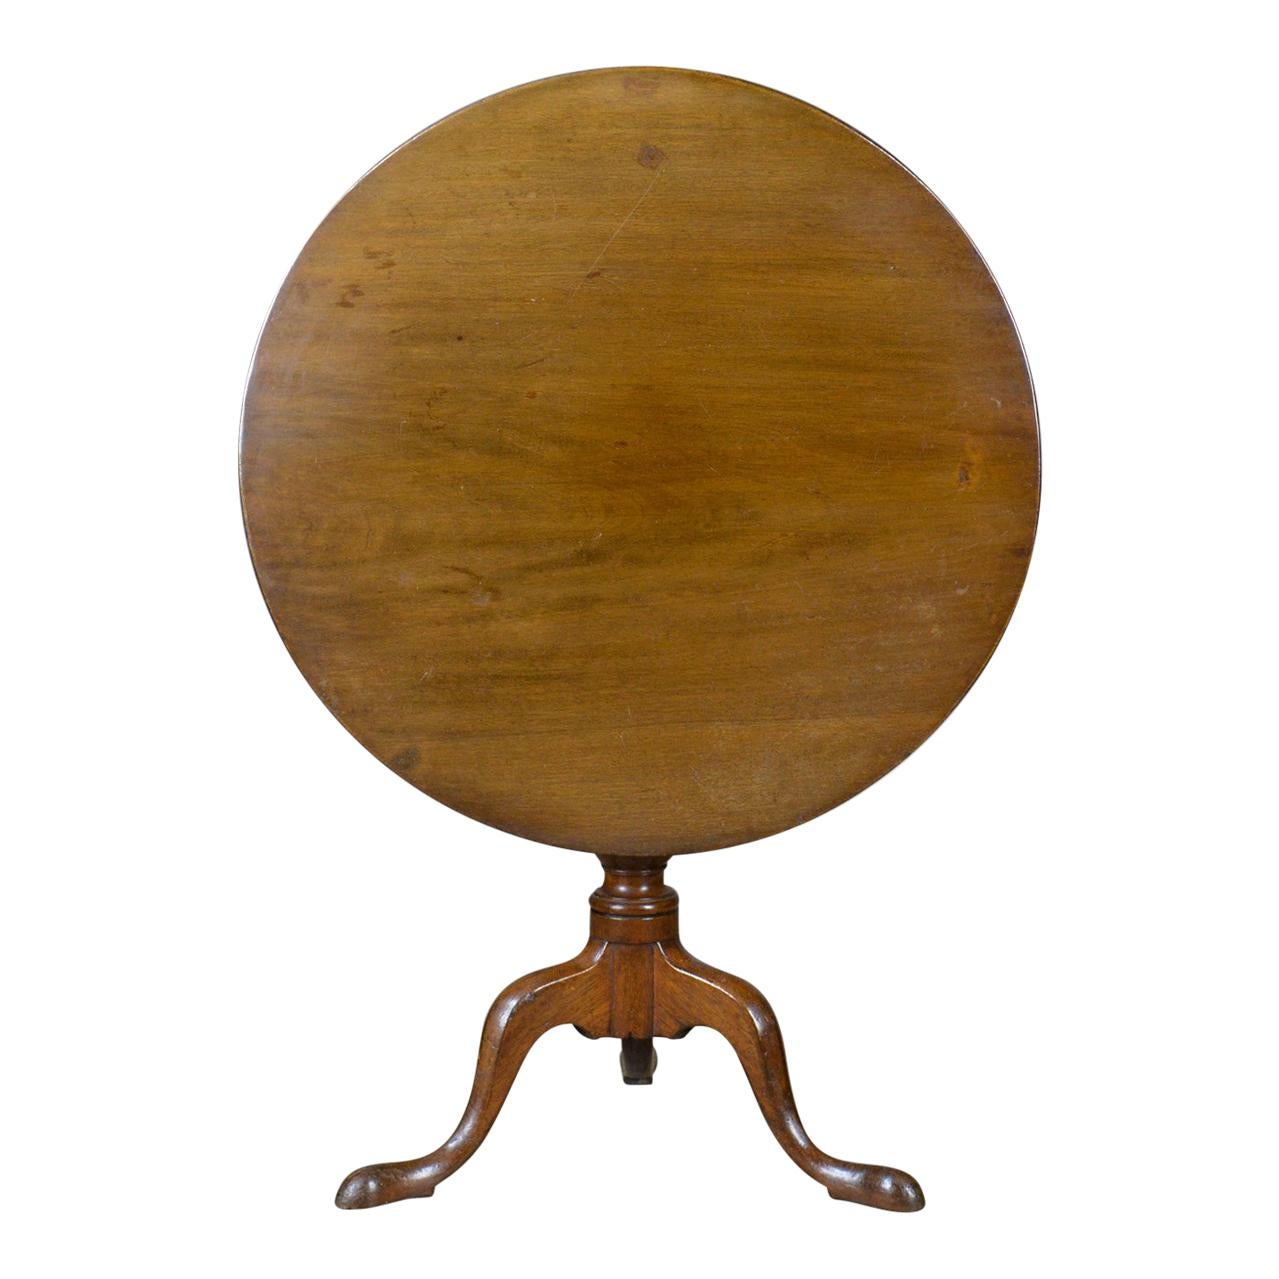 Antique Tilt-Top Table, English, Mahogany, Side, Early 19th Century, circa 1800